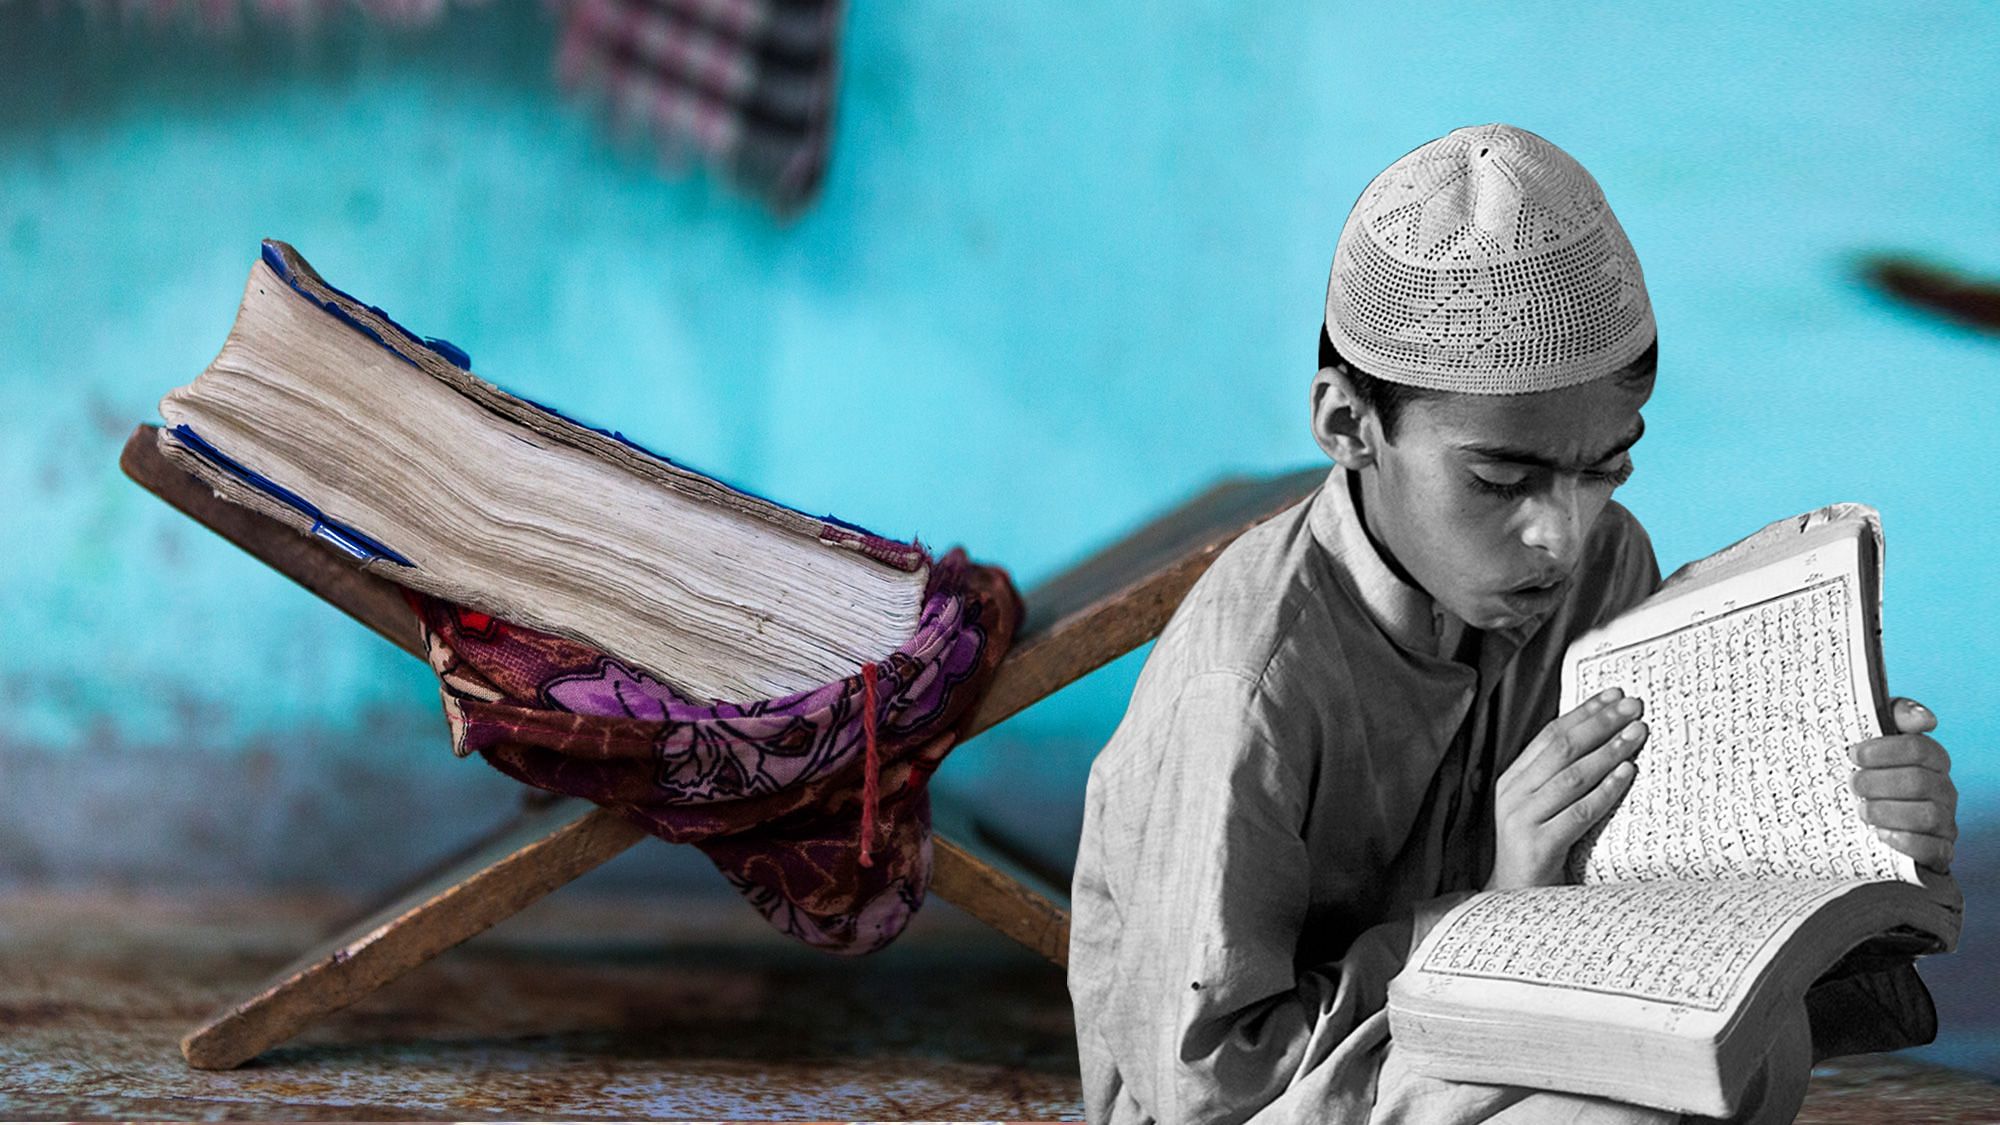 The move is set to impact over 16,000 madrasas in the state.